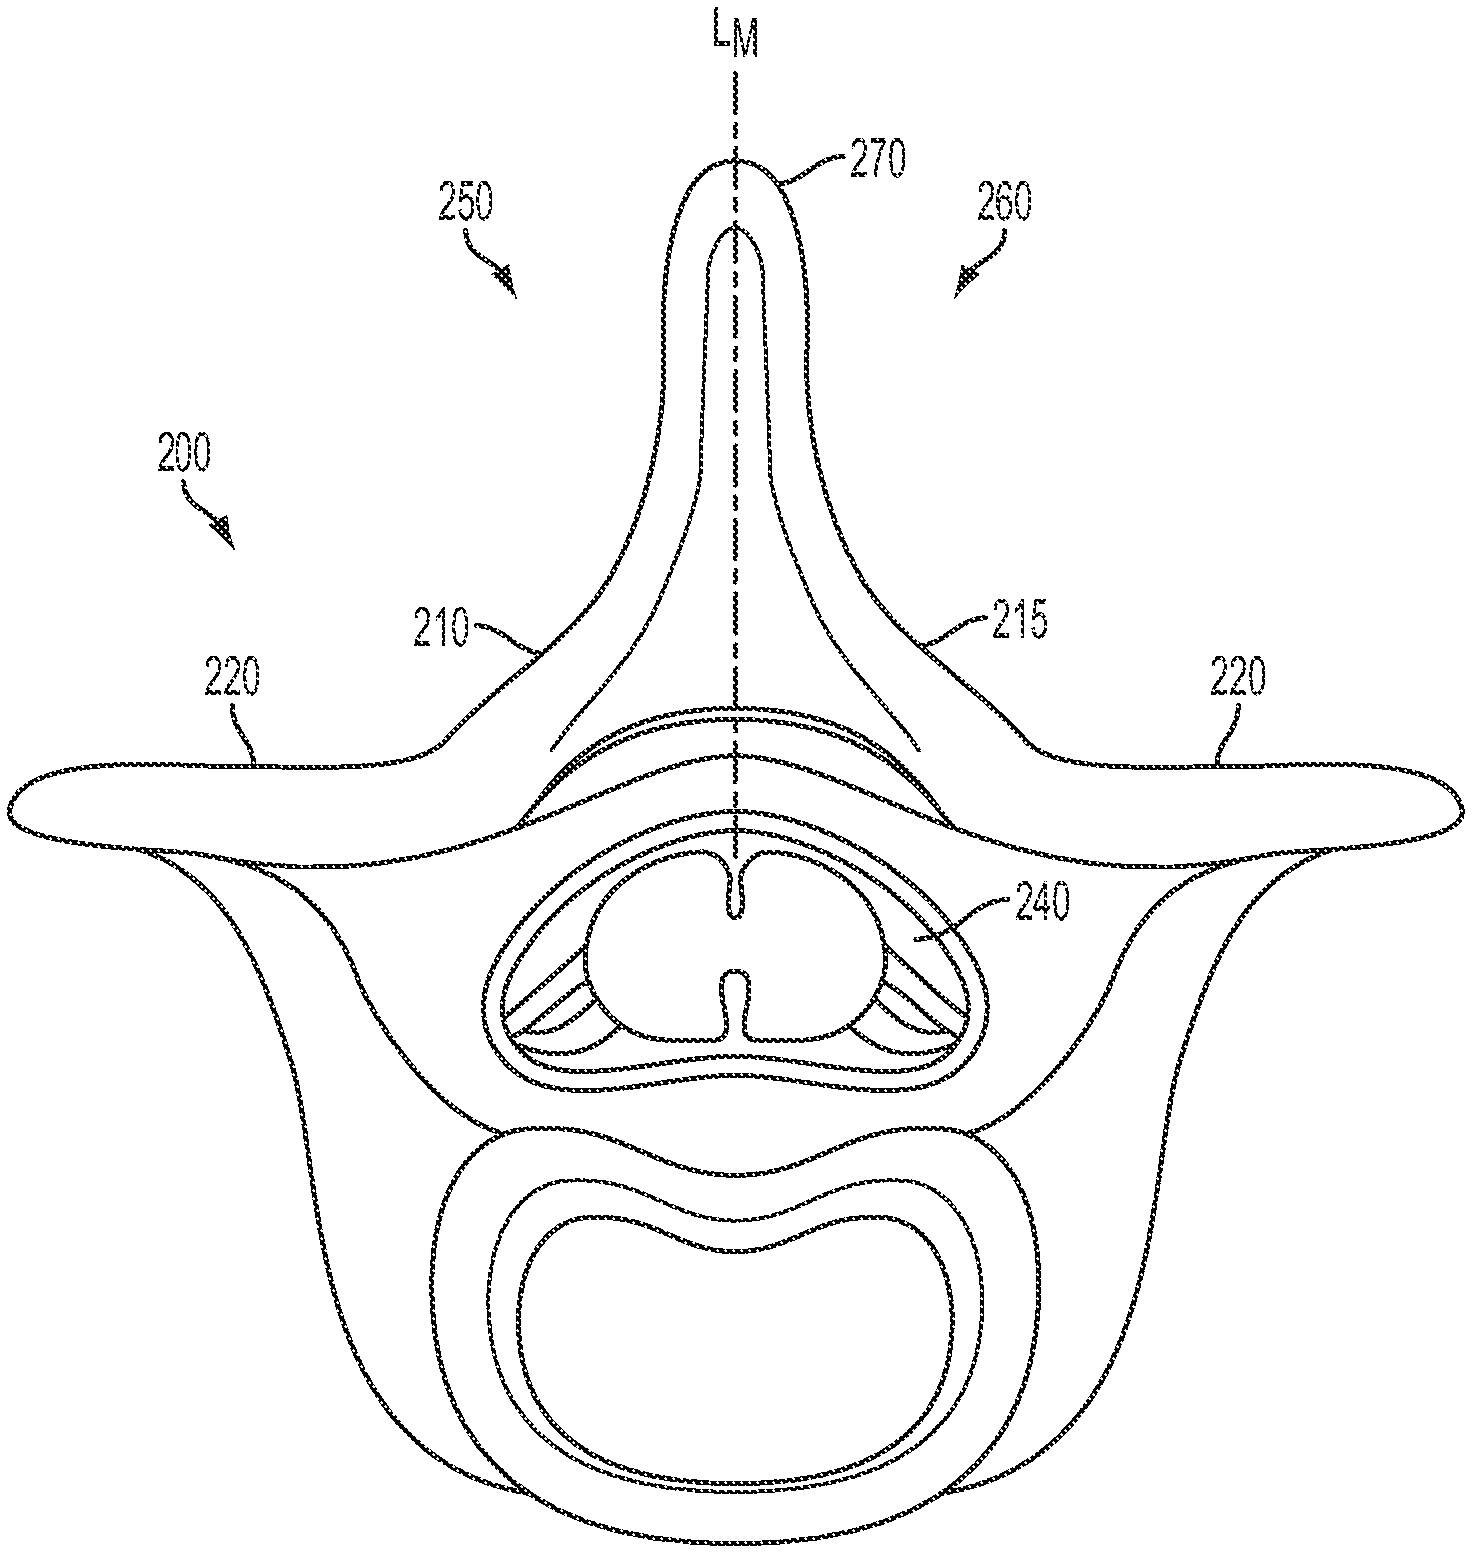 Laminoplasty system and method of use